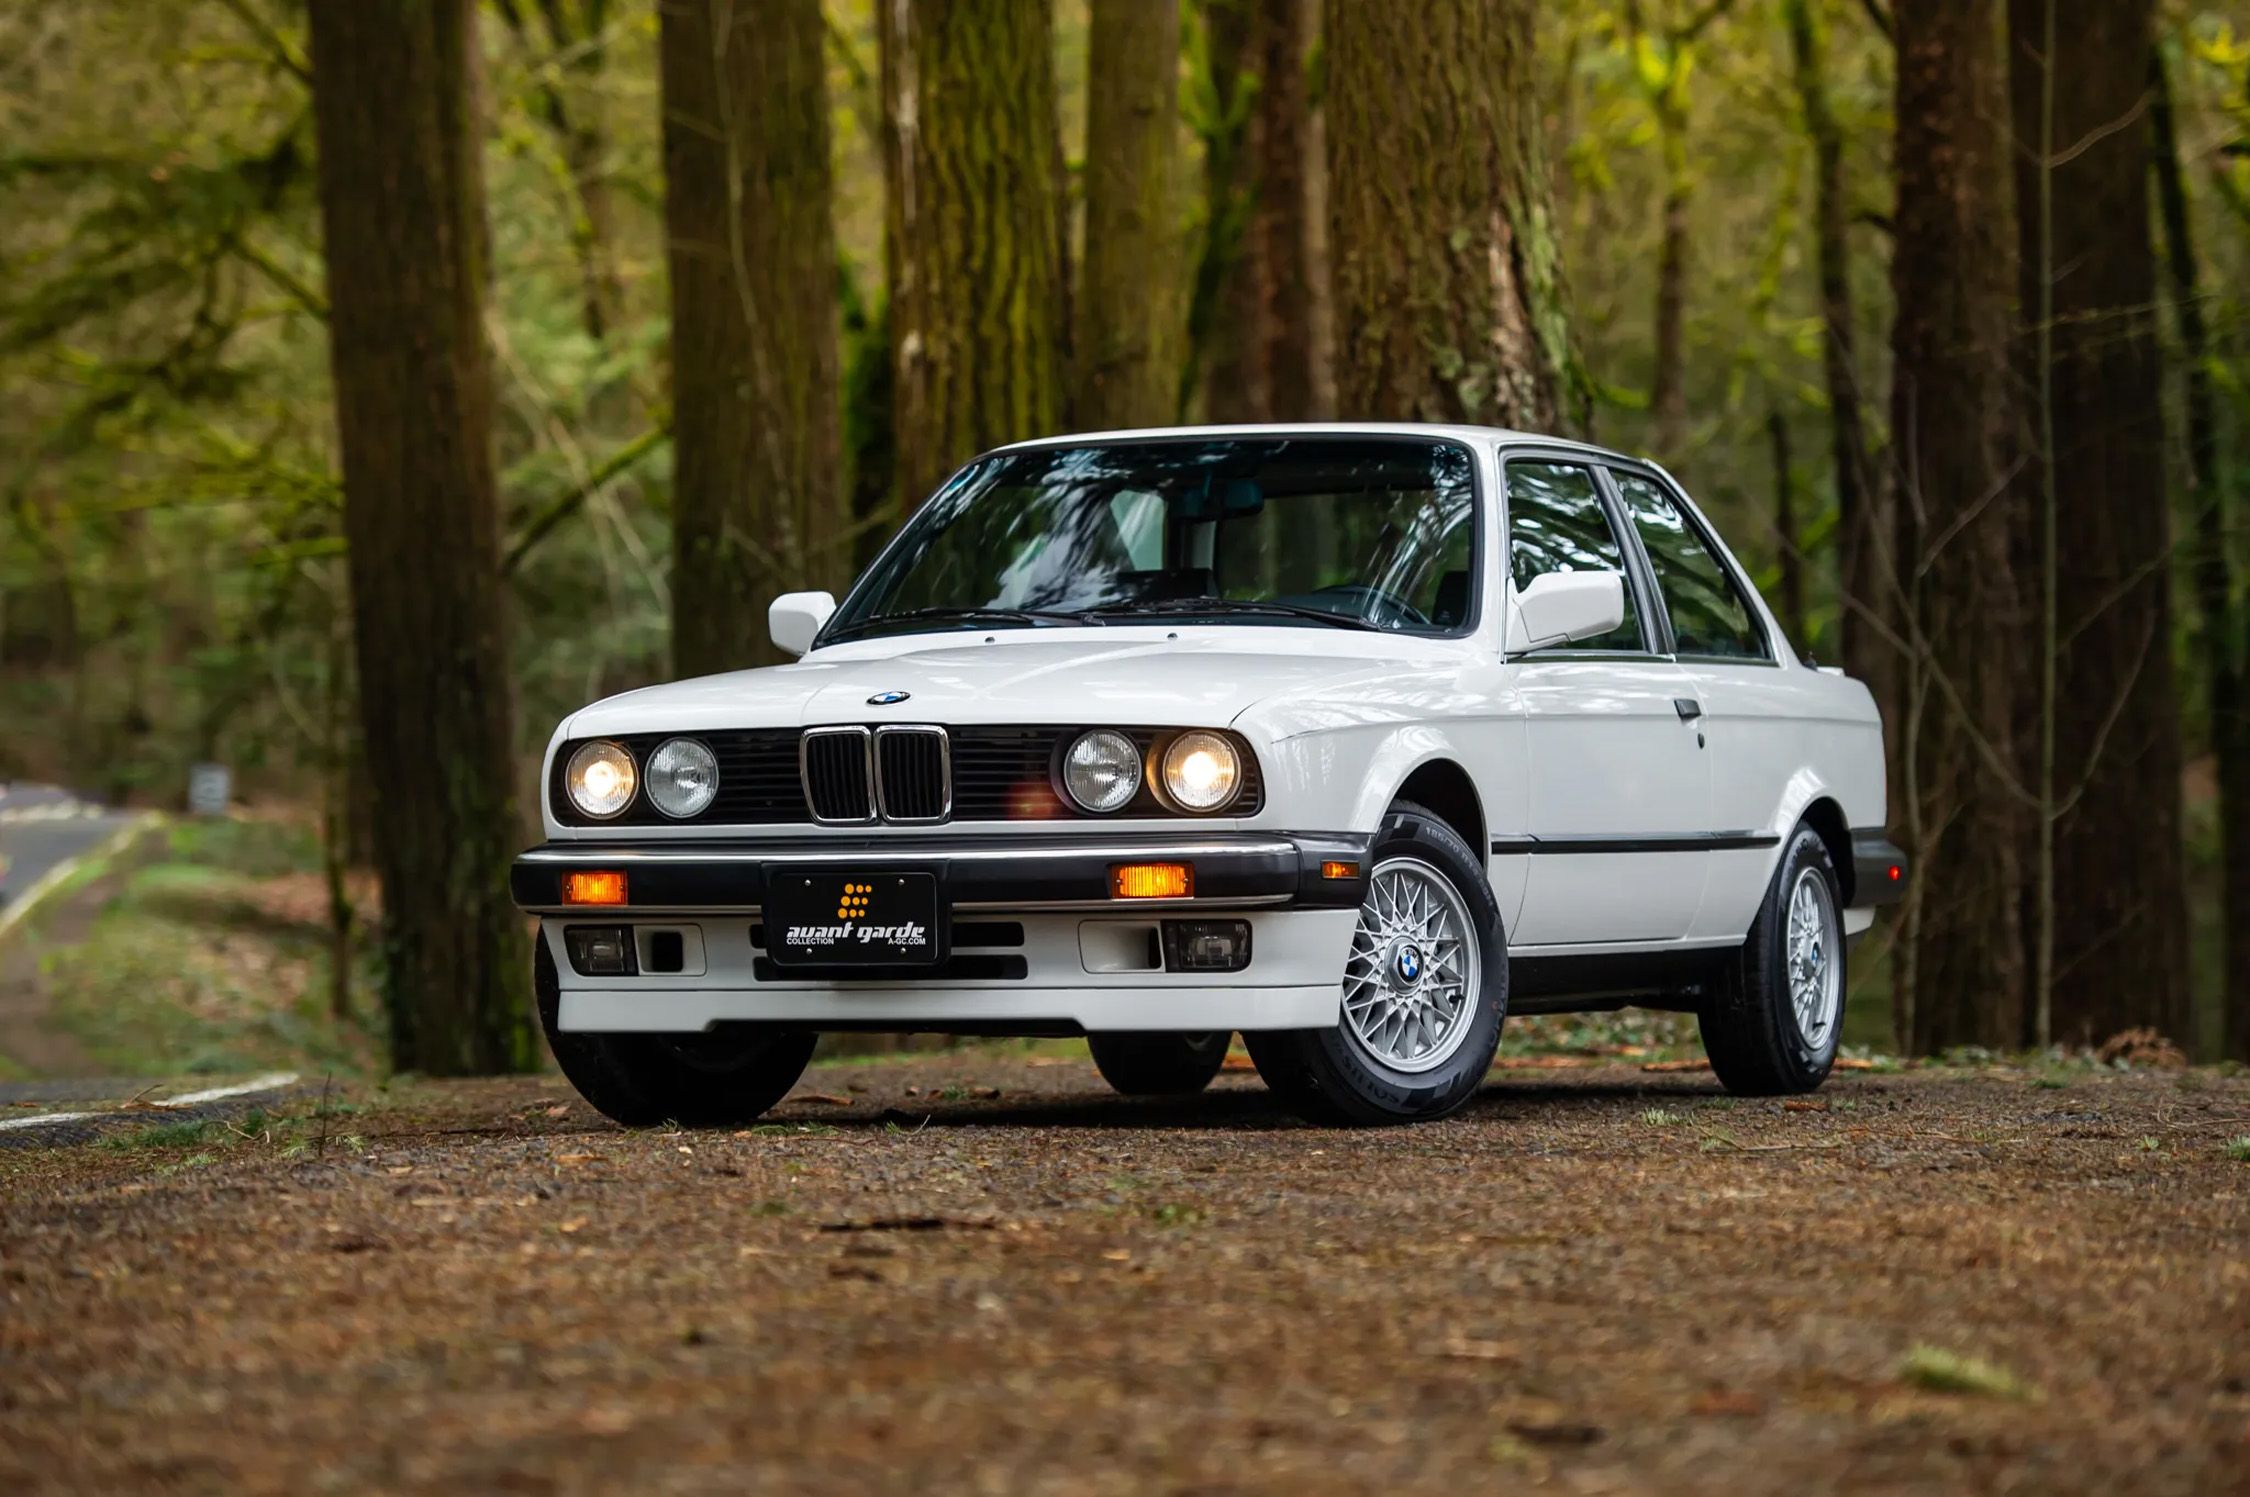 1988 BMW 325is Coupe Is Today's Bring a Trailer Find